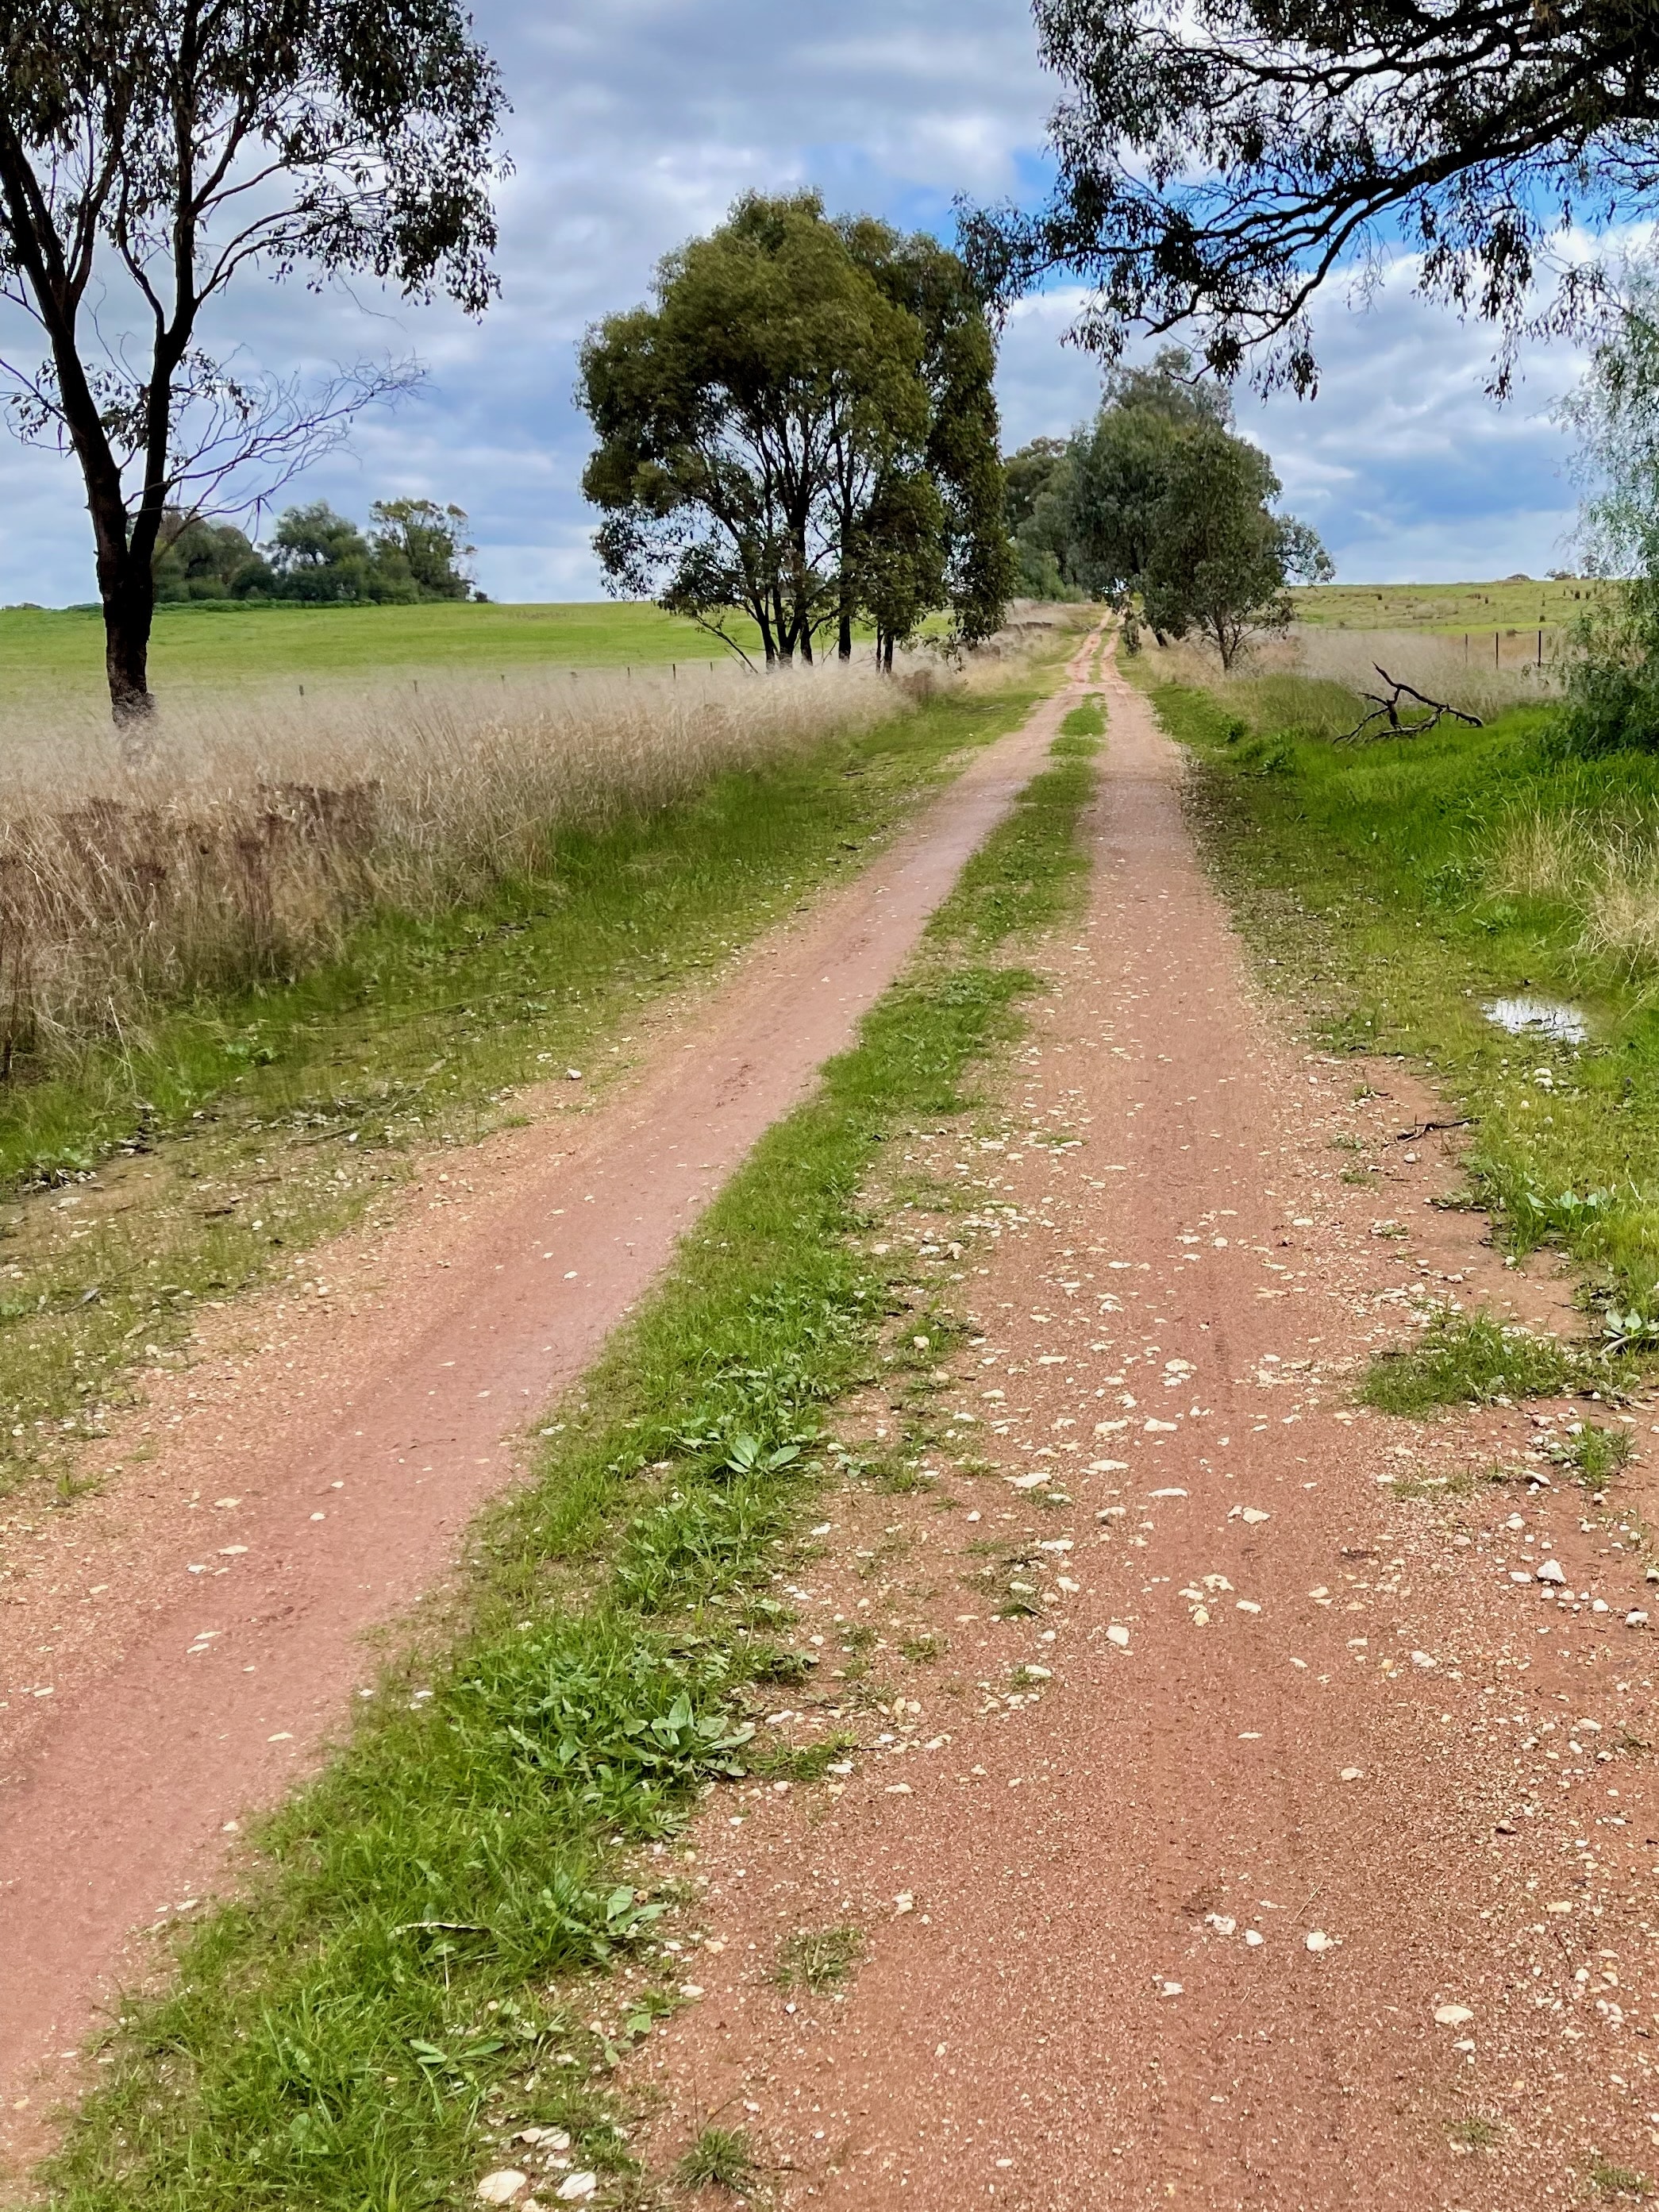 A gently rising smooth dirt double track surrounded by open farmland and native trees in the distance